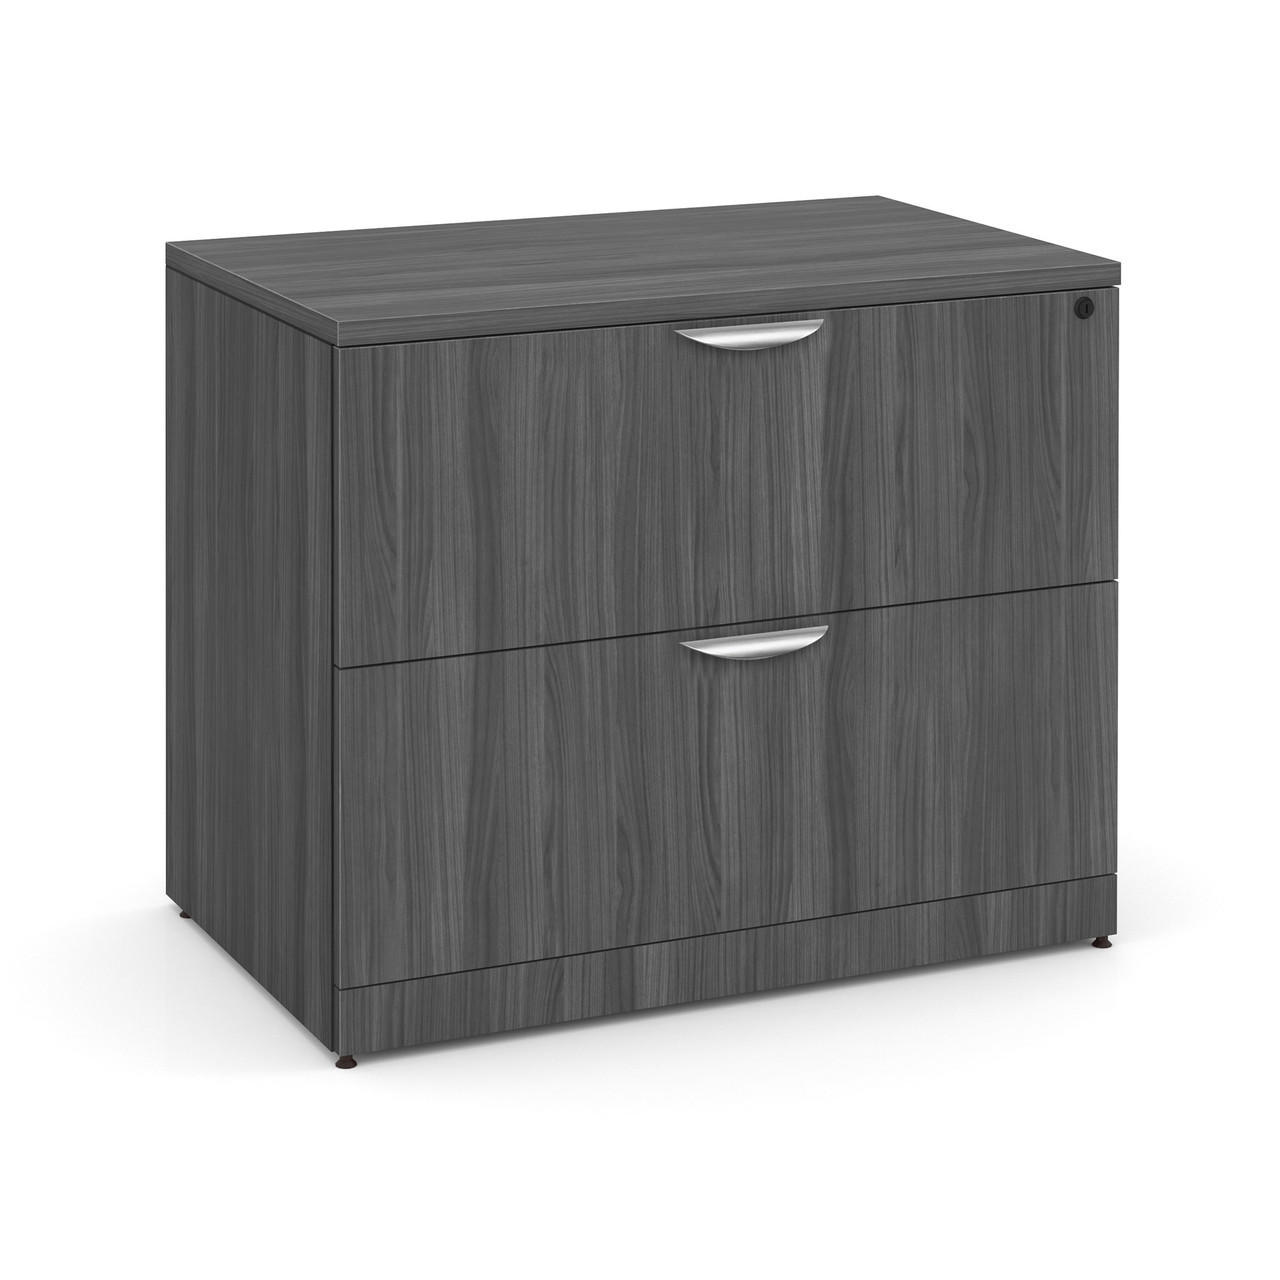  Office Source OS Laminate Lateral File Cabinet PL112 